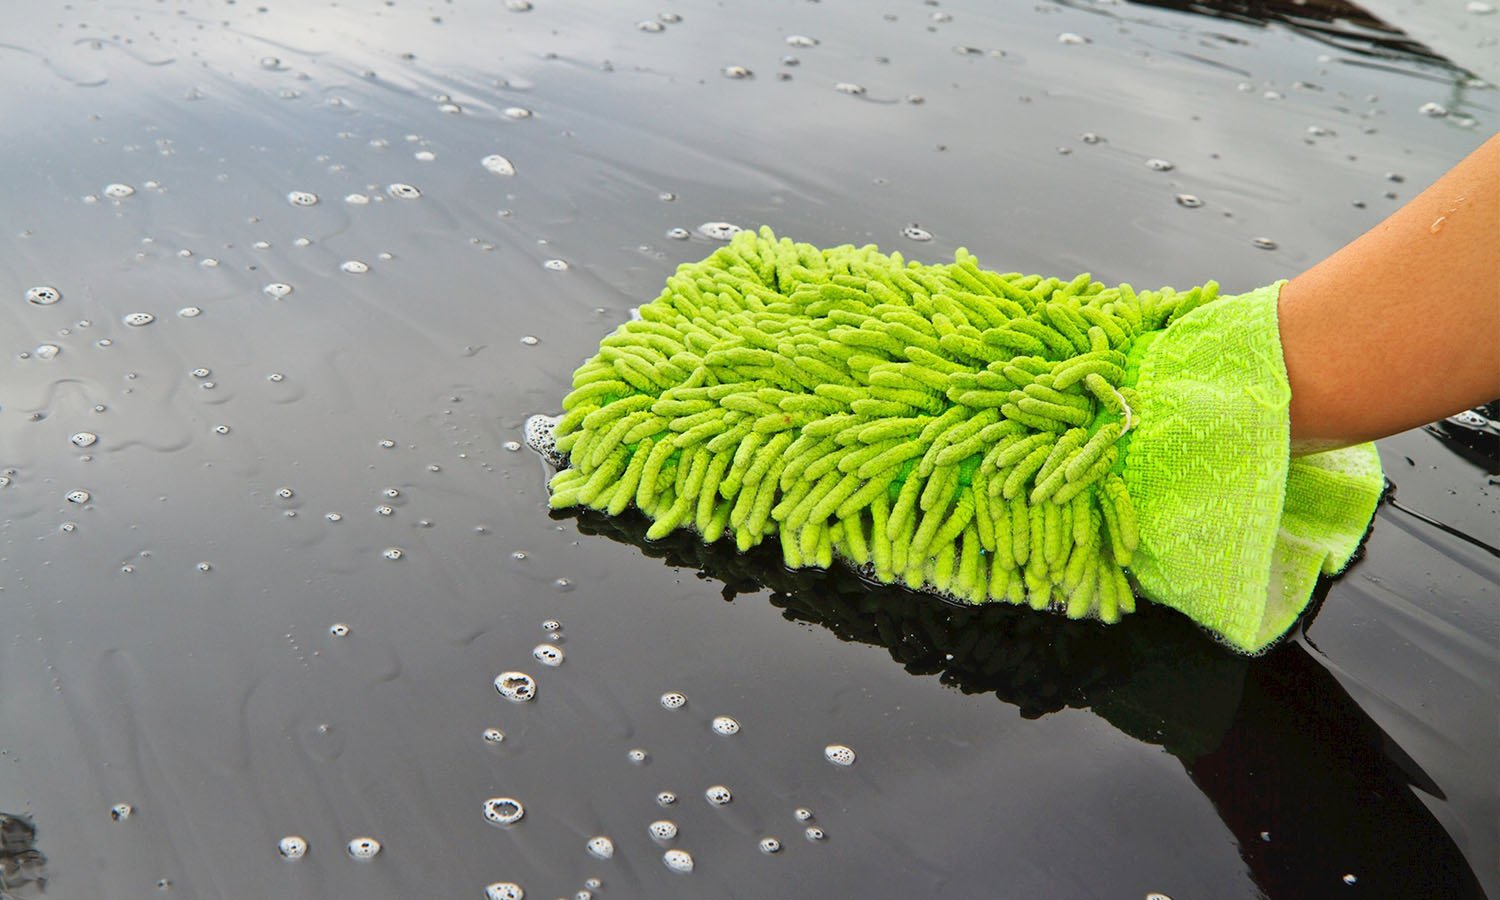 Tips On Washing And Caring For Your Car: Keep It Clean!